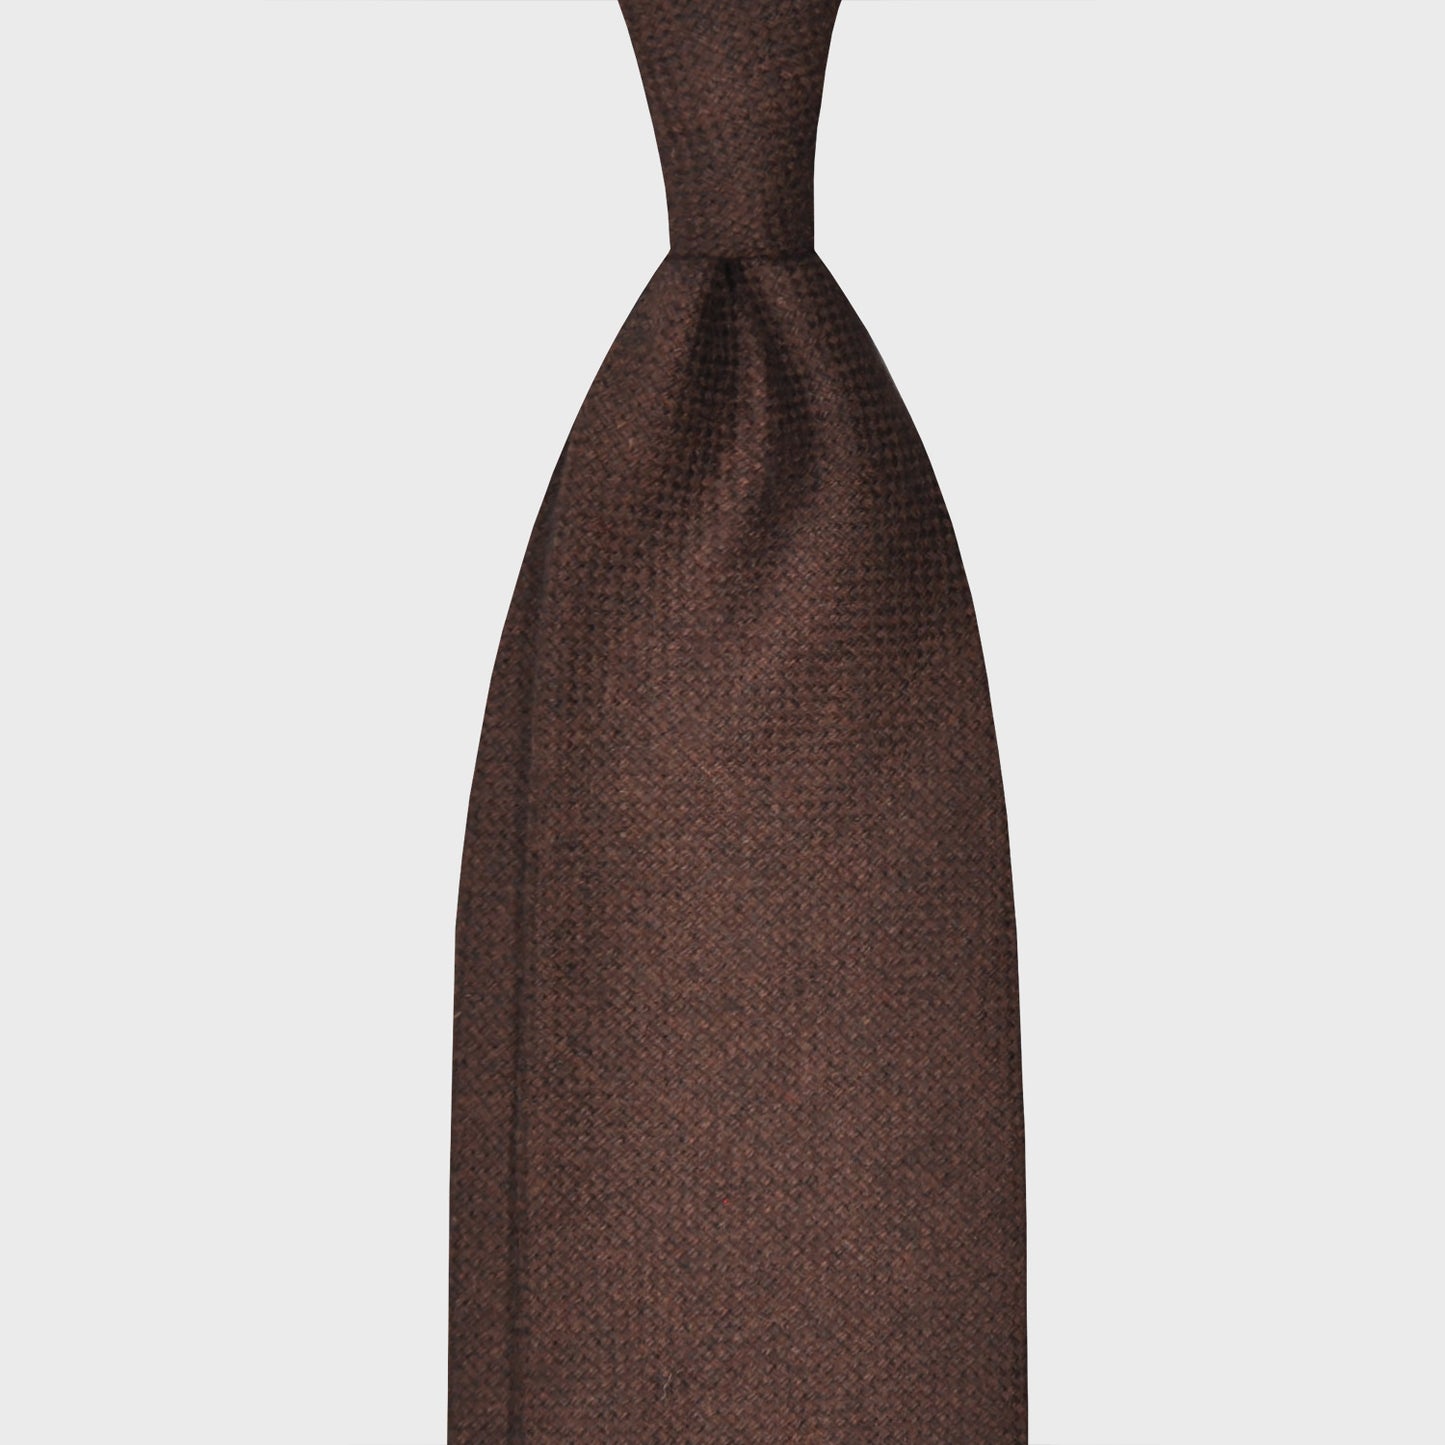 Coffee Brown Light Flannel Twill Wool Tie Unlined 3 Folds. Soft and light flannel twill wool tie, handmade F.Marino Napoli for Wools Boutique Uomo, coffee brown color, soft fabric to the touch, not bristly, ideal for a regular knot.